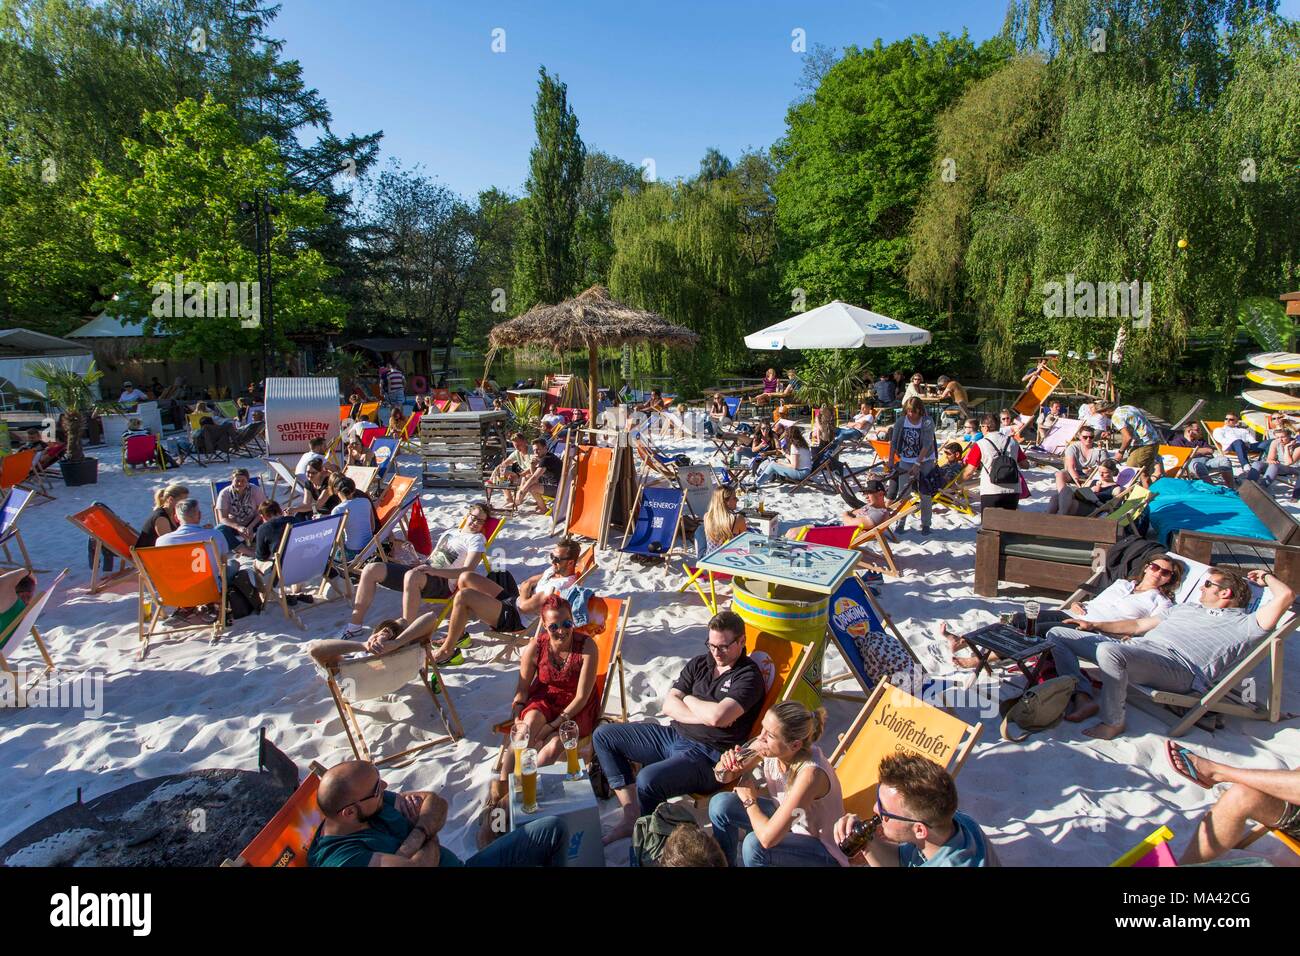 The Okercabana beach club in the Bürgerpark by the river Oker in Braunschweig (Brunswick), Germany Stock Photo